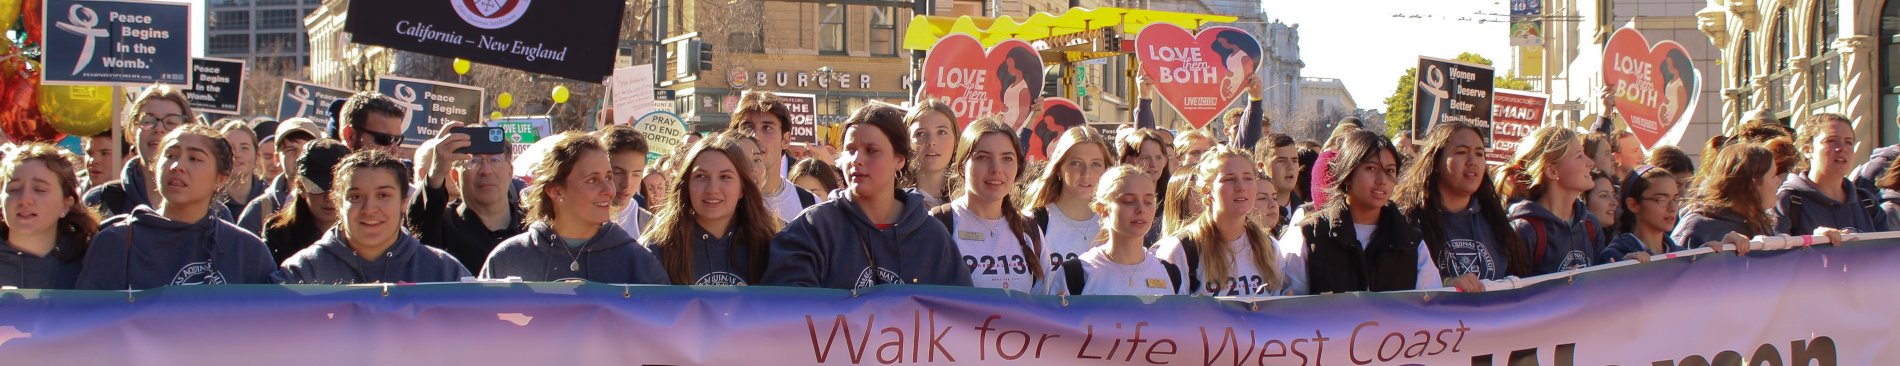 Students push forward, holding the Walk for Life banner